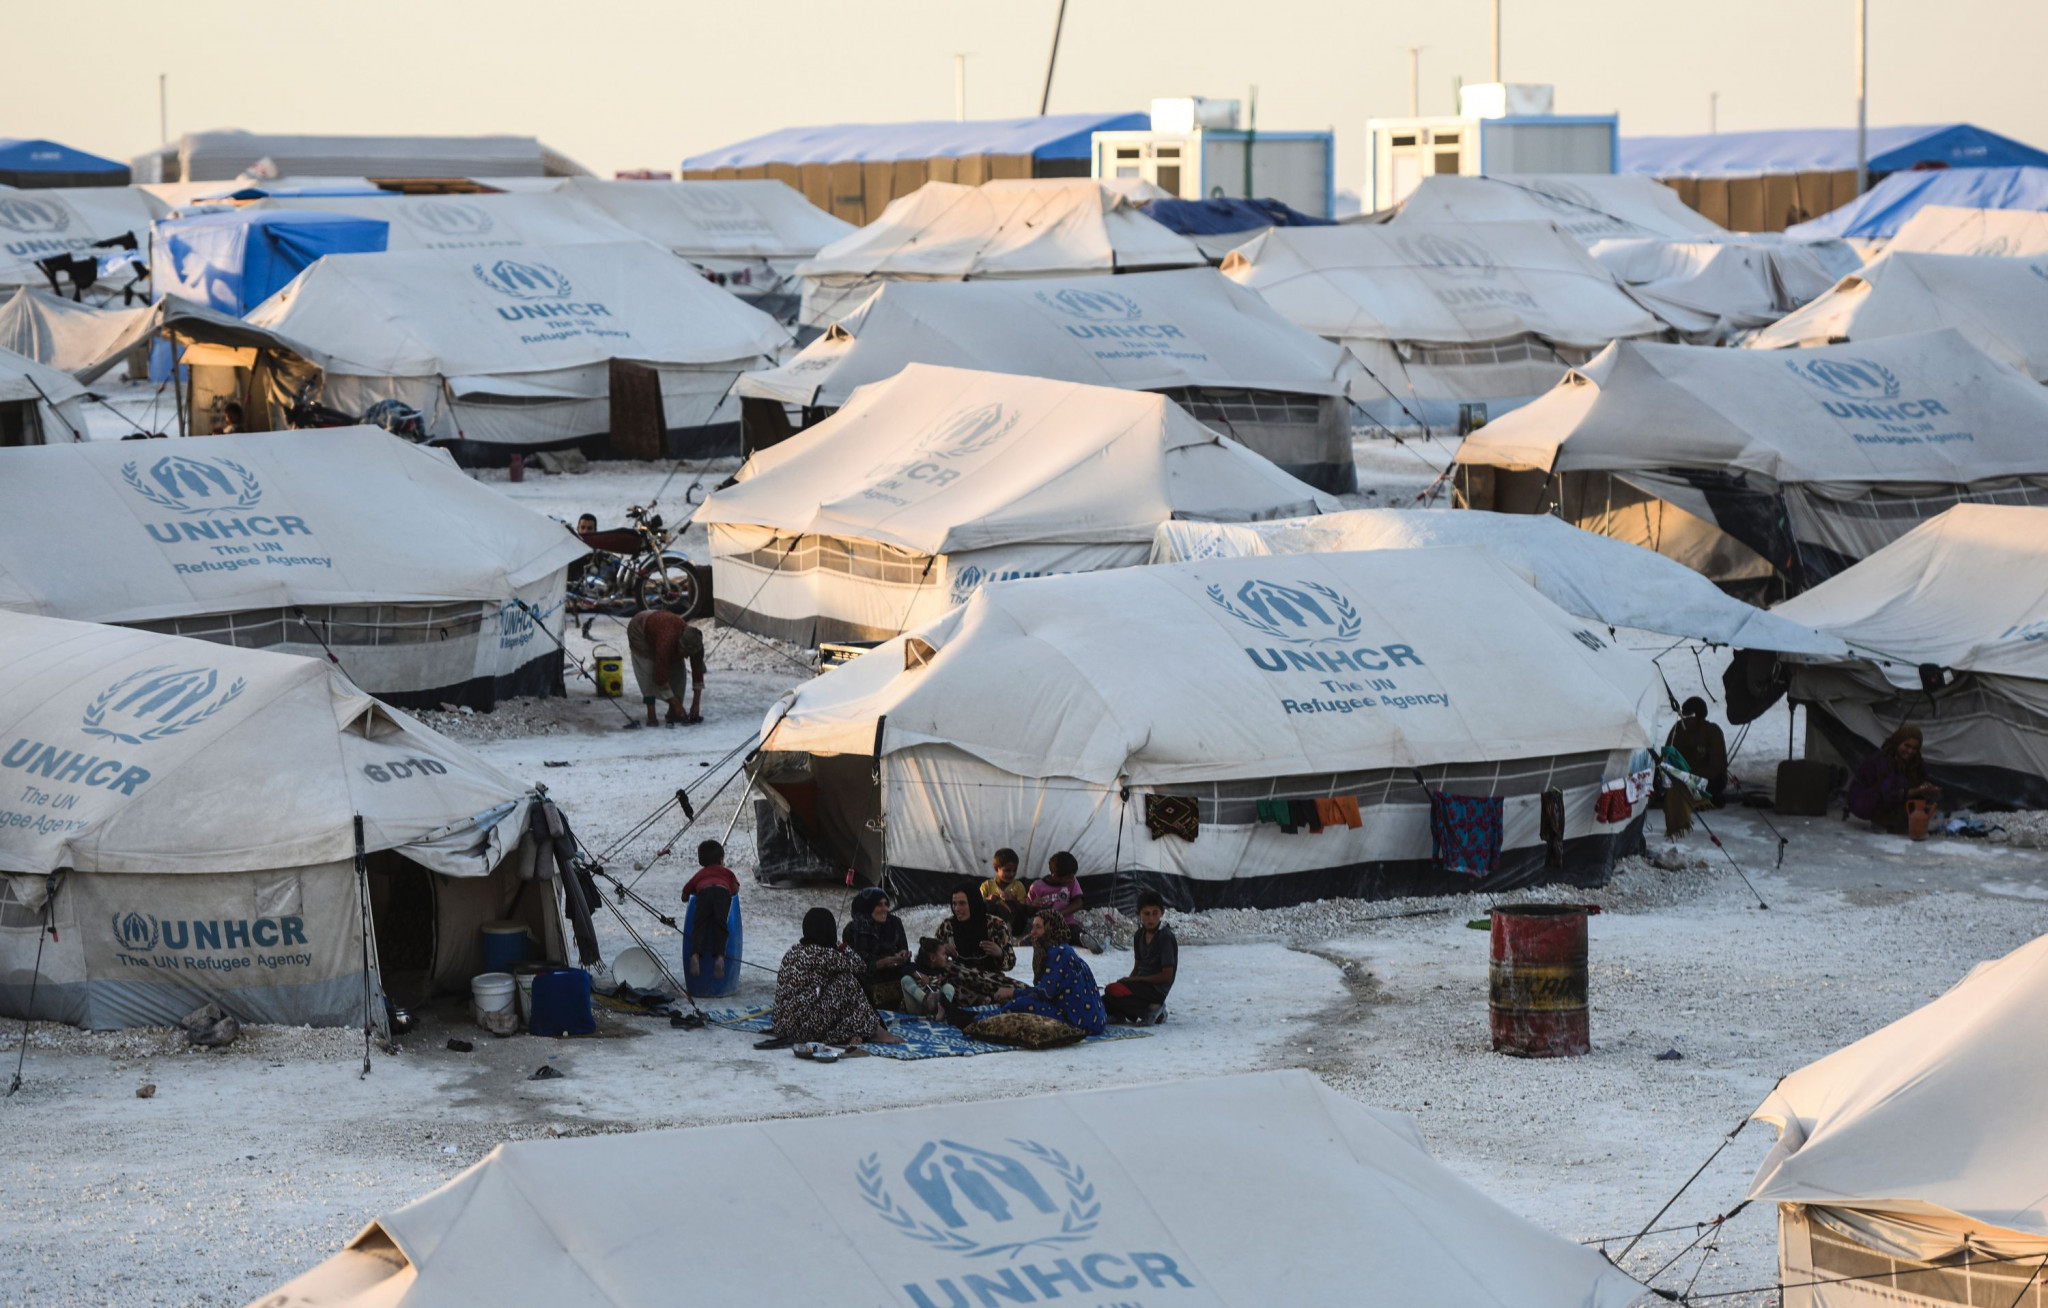 AIBA has vowed to work with the UNHCR to improve the lives of refugees and displaced people ©Getty Images